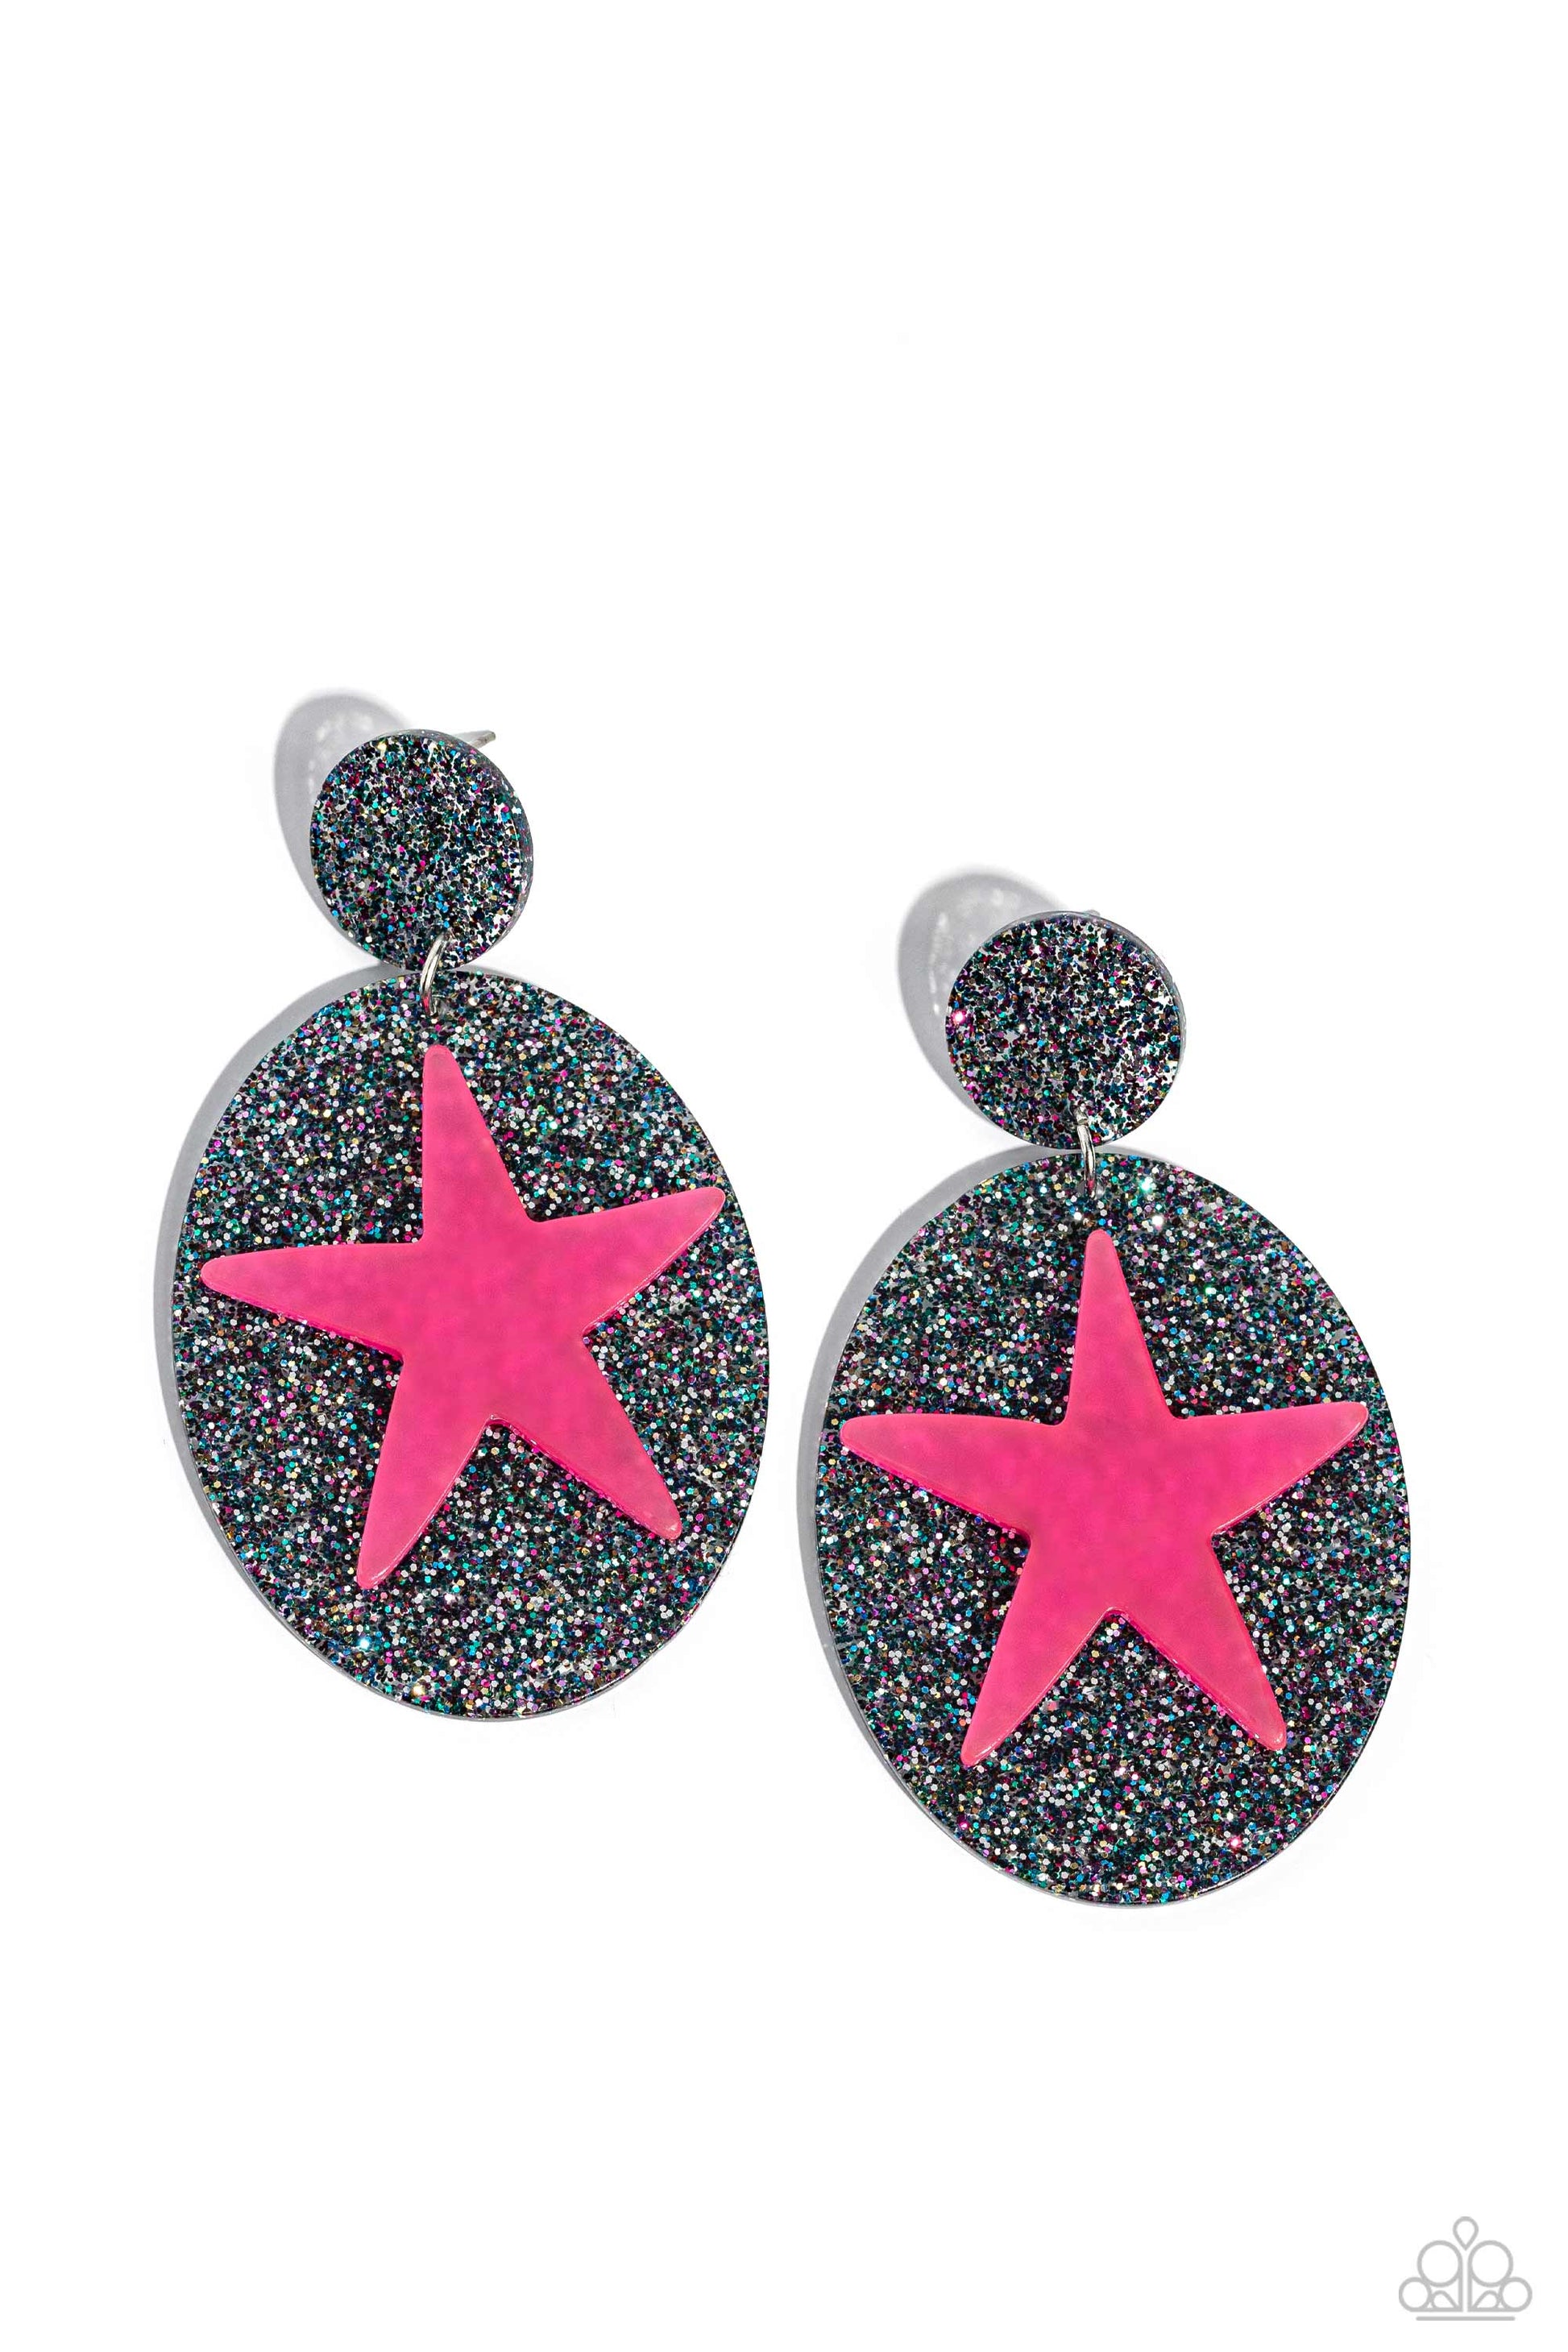 Paparazzi Accessories - Galaxy Getaway - Pink Earrings featuring a multicolored glittery backdrop, a black acrylic oval swings from the bottom of a smaller black glittery fitting, creating a colorful frame. A hot pink acrylic star is embossed atop the larger oval, finishing the design off with a stellar statement. Earring attaches to a standard post fitting.  Sold as one pair of post earrings.